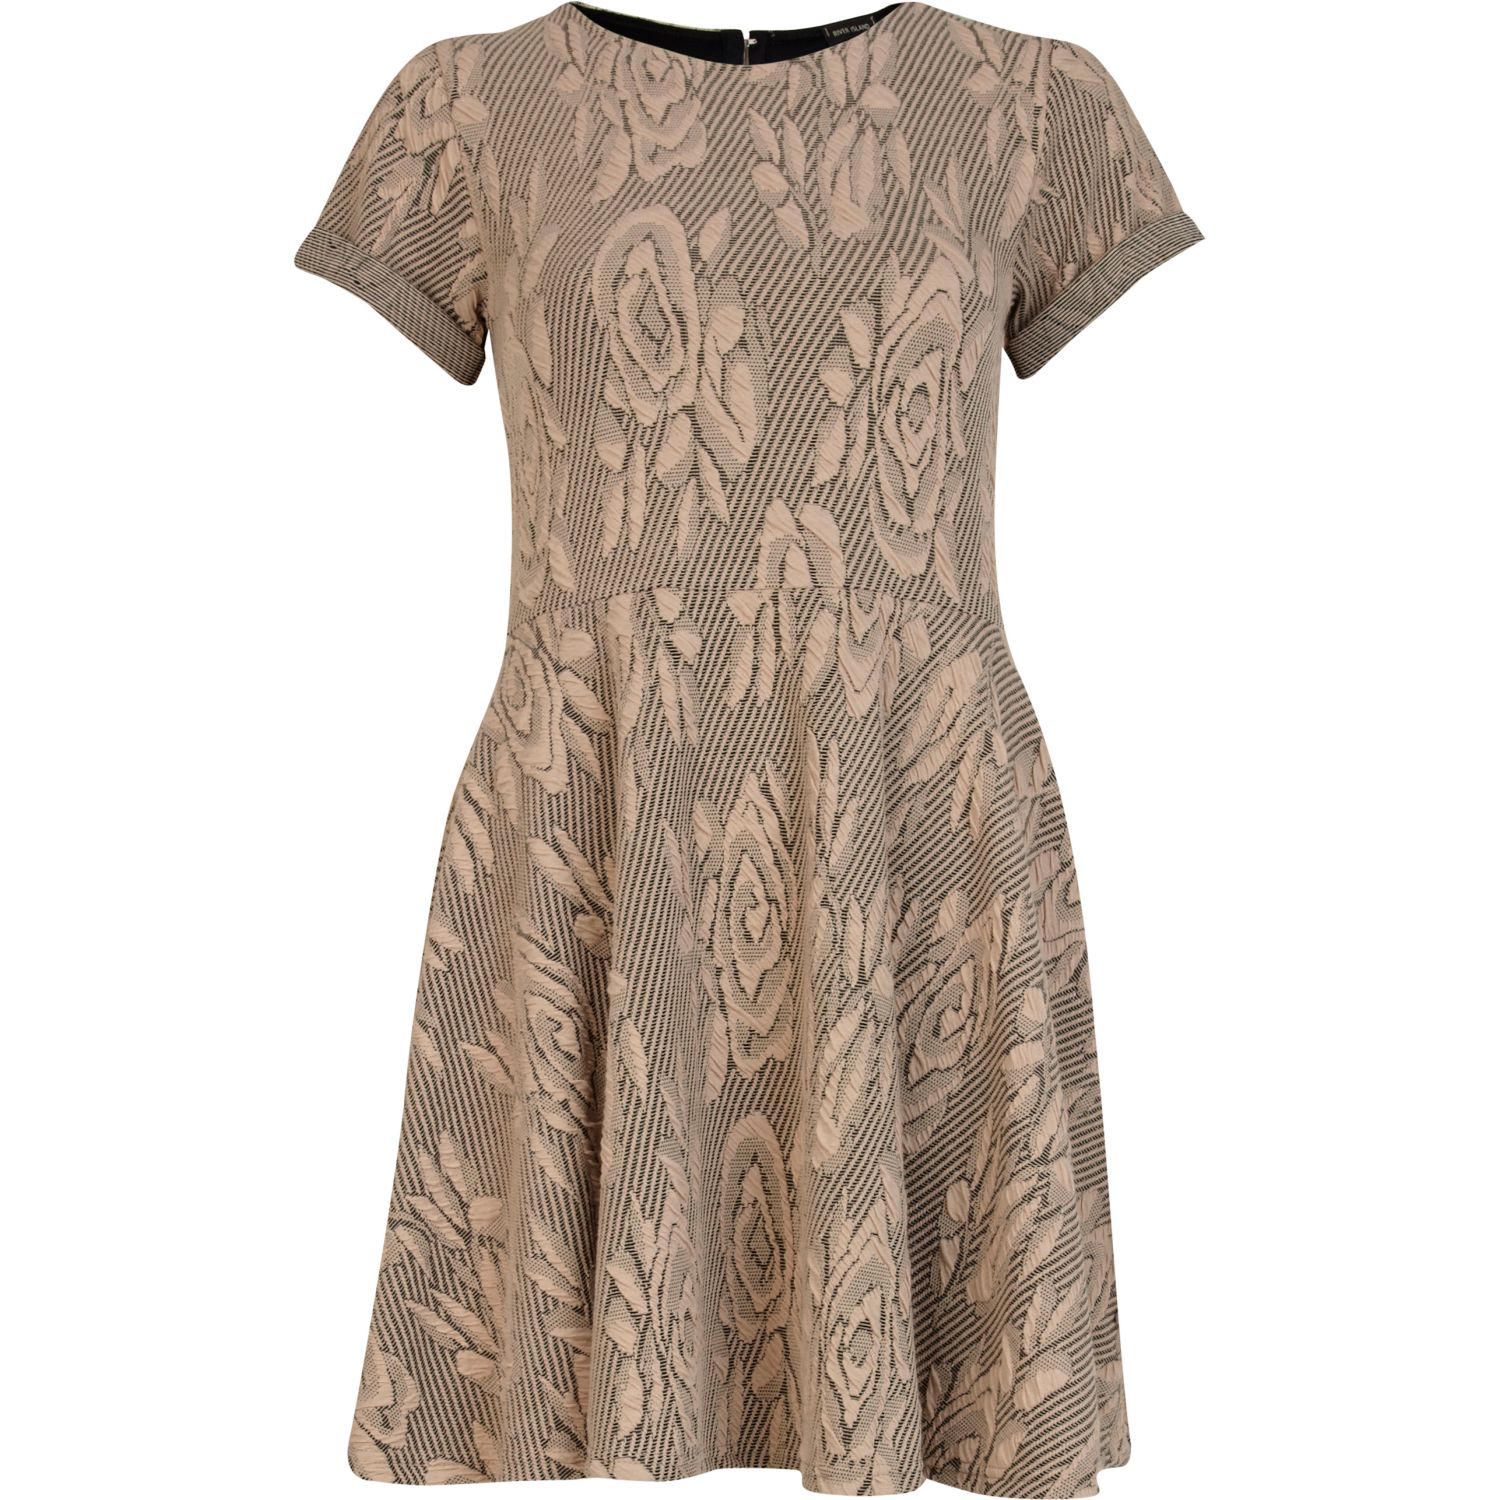 River Island Floral Jacquard Cut Out Skater Dress in Beige | Lyst